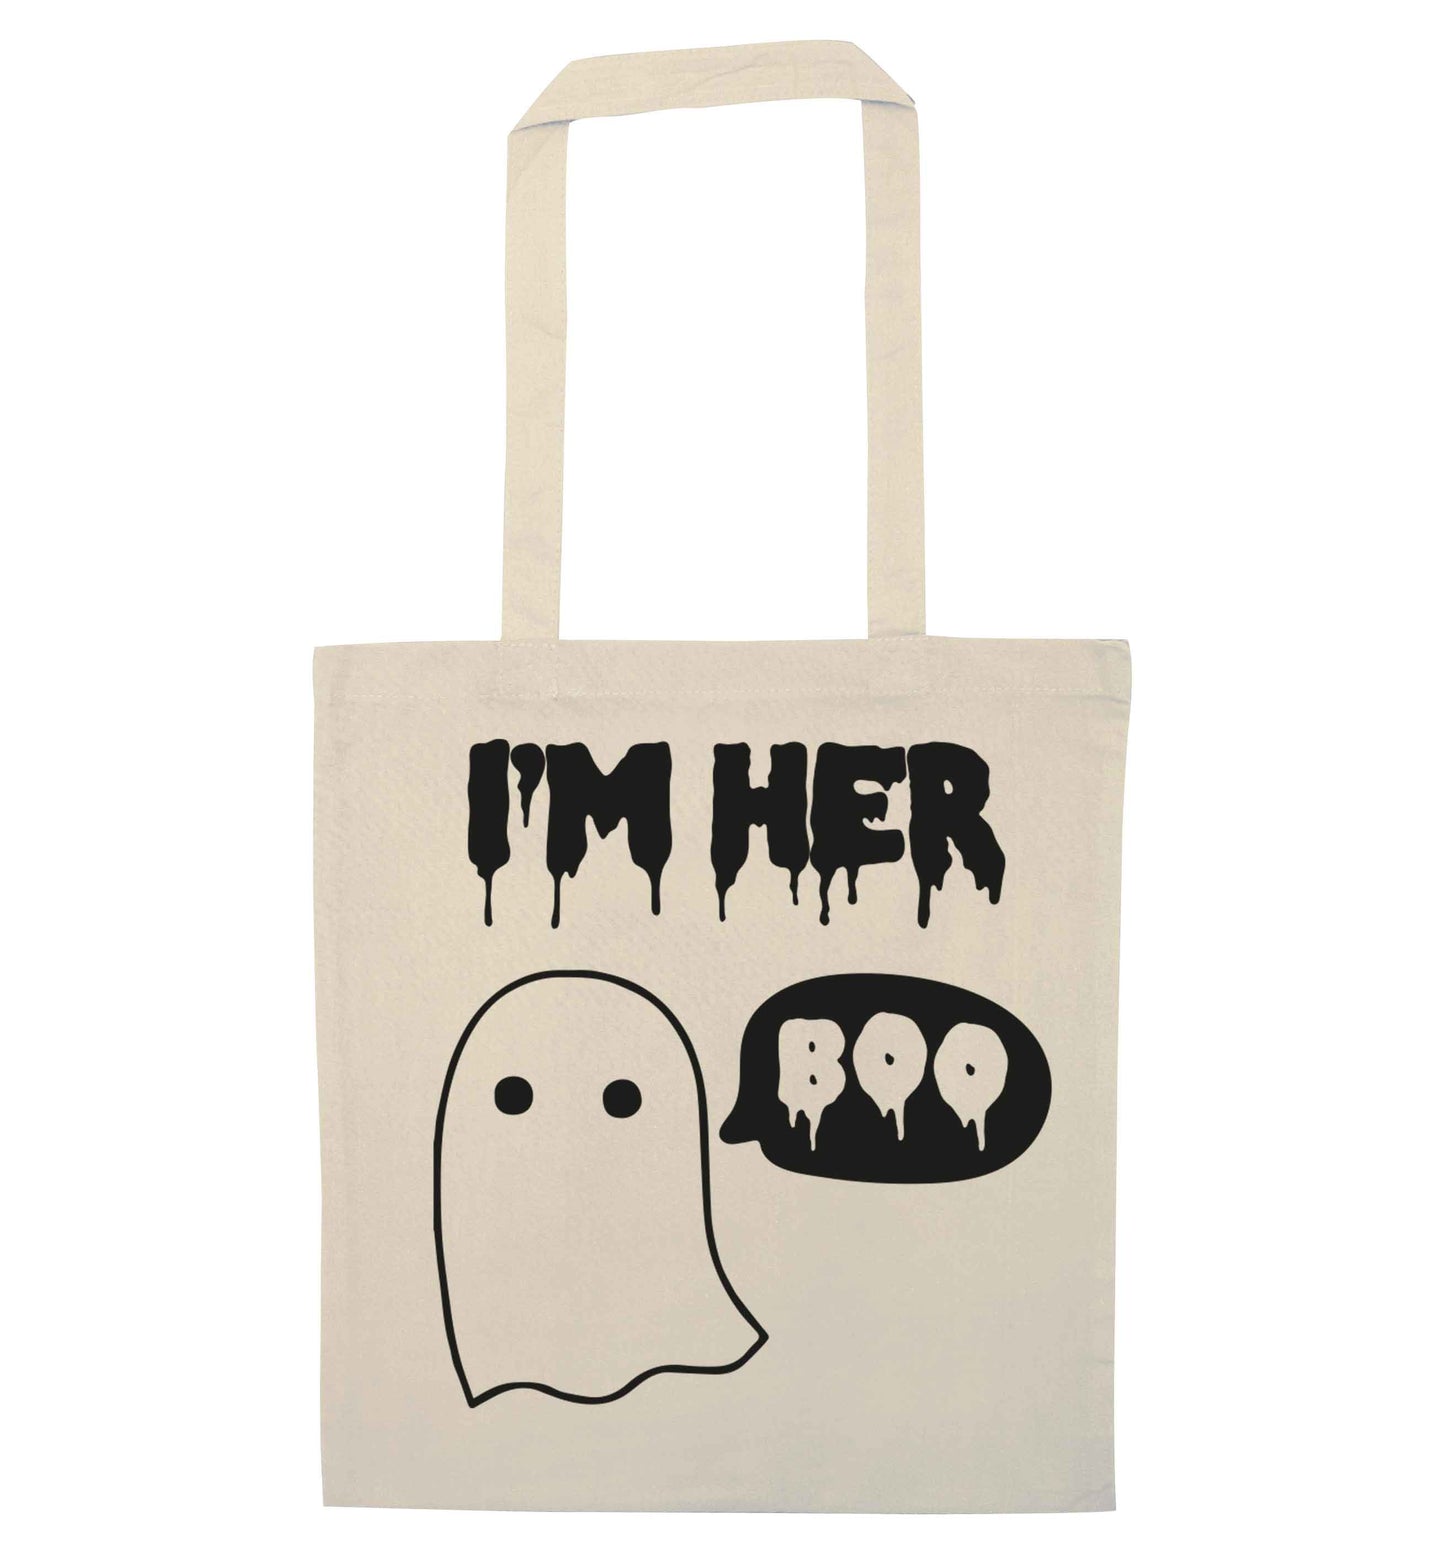 I'm her boo natural tote bag